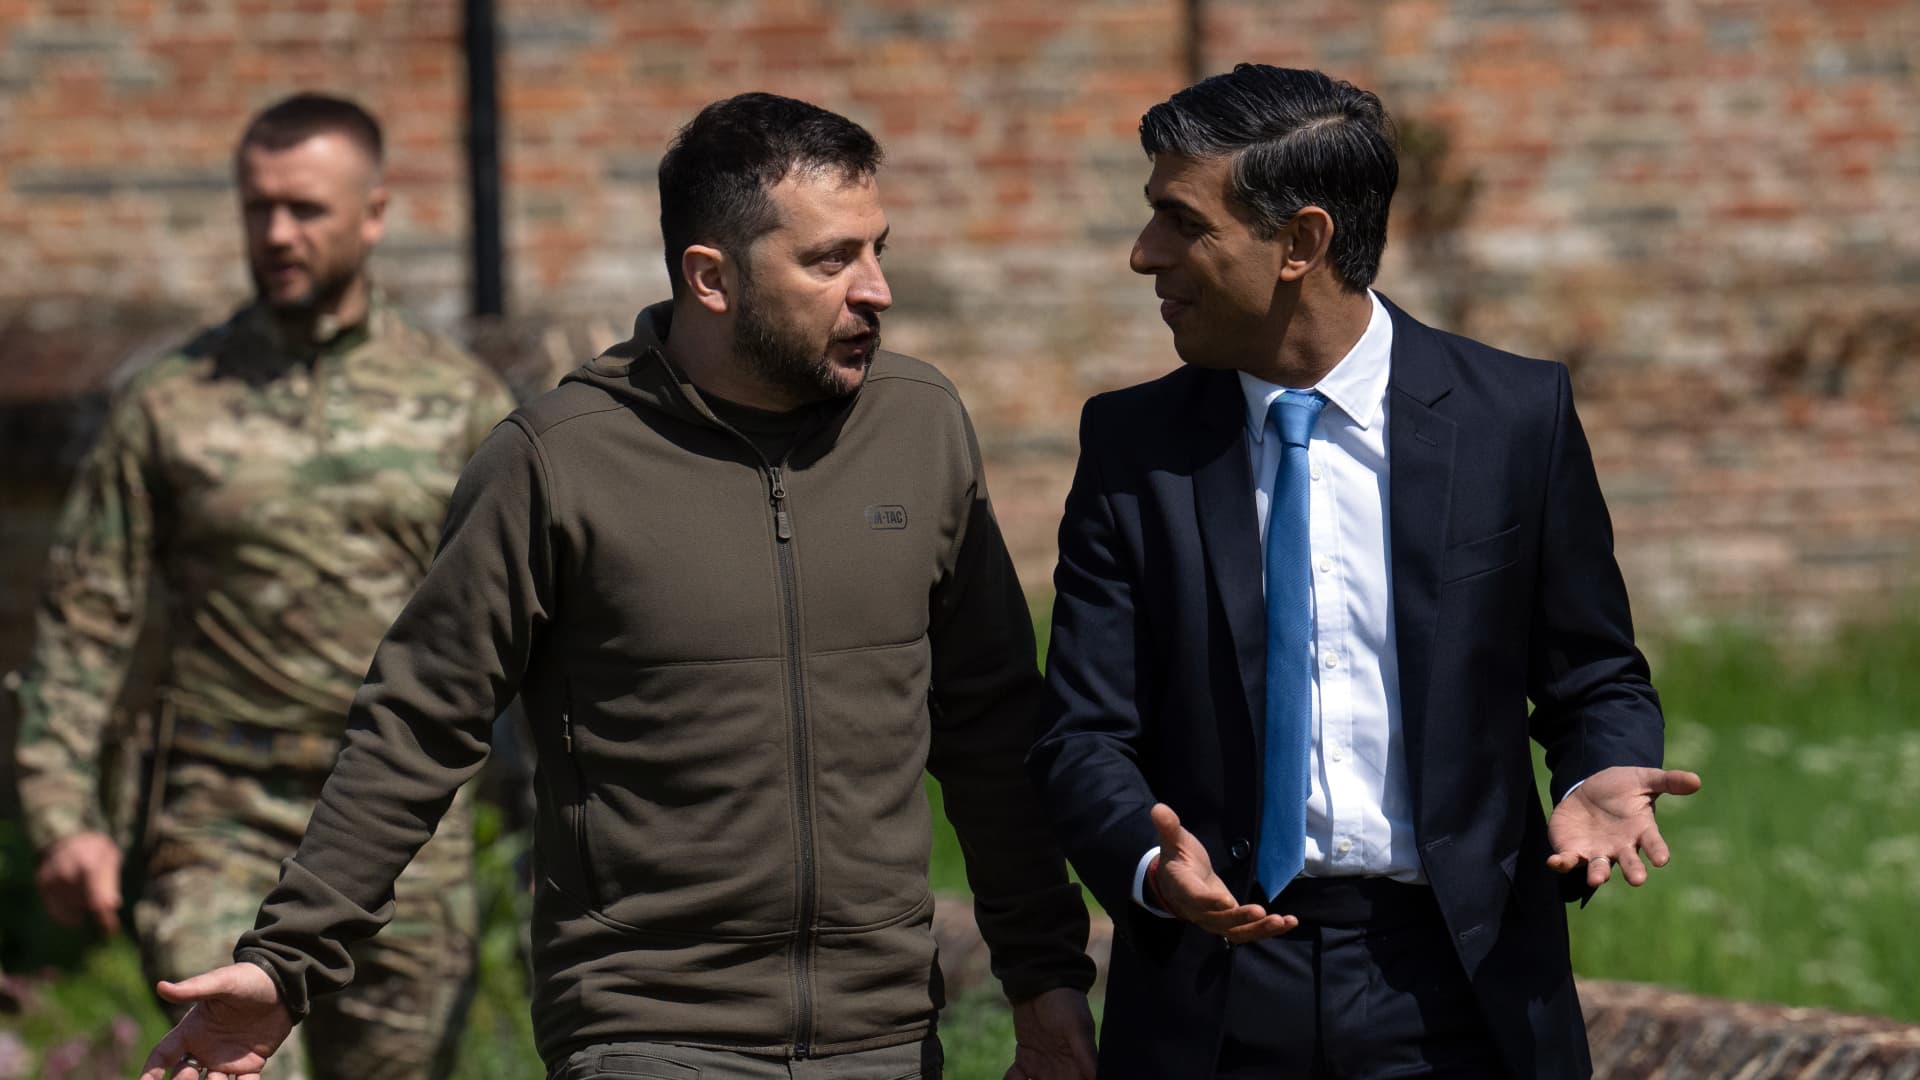 Britain's Prime Minister, Rishi Sunak (R) with Ukraine's President, Volodymyr Zelenskyy, walk to a waiting Chinook helicopter after meetings at Chequers on May 15, 2023 in Aylesbury, England.